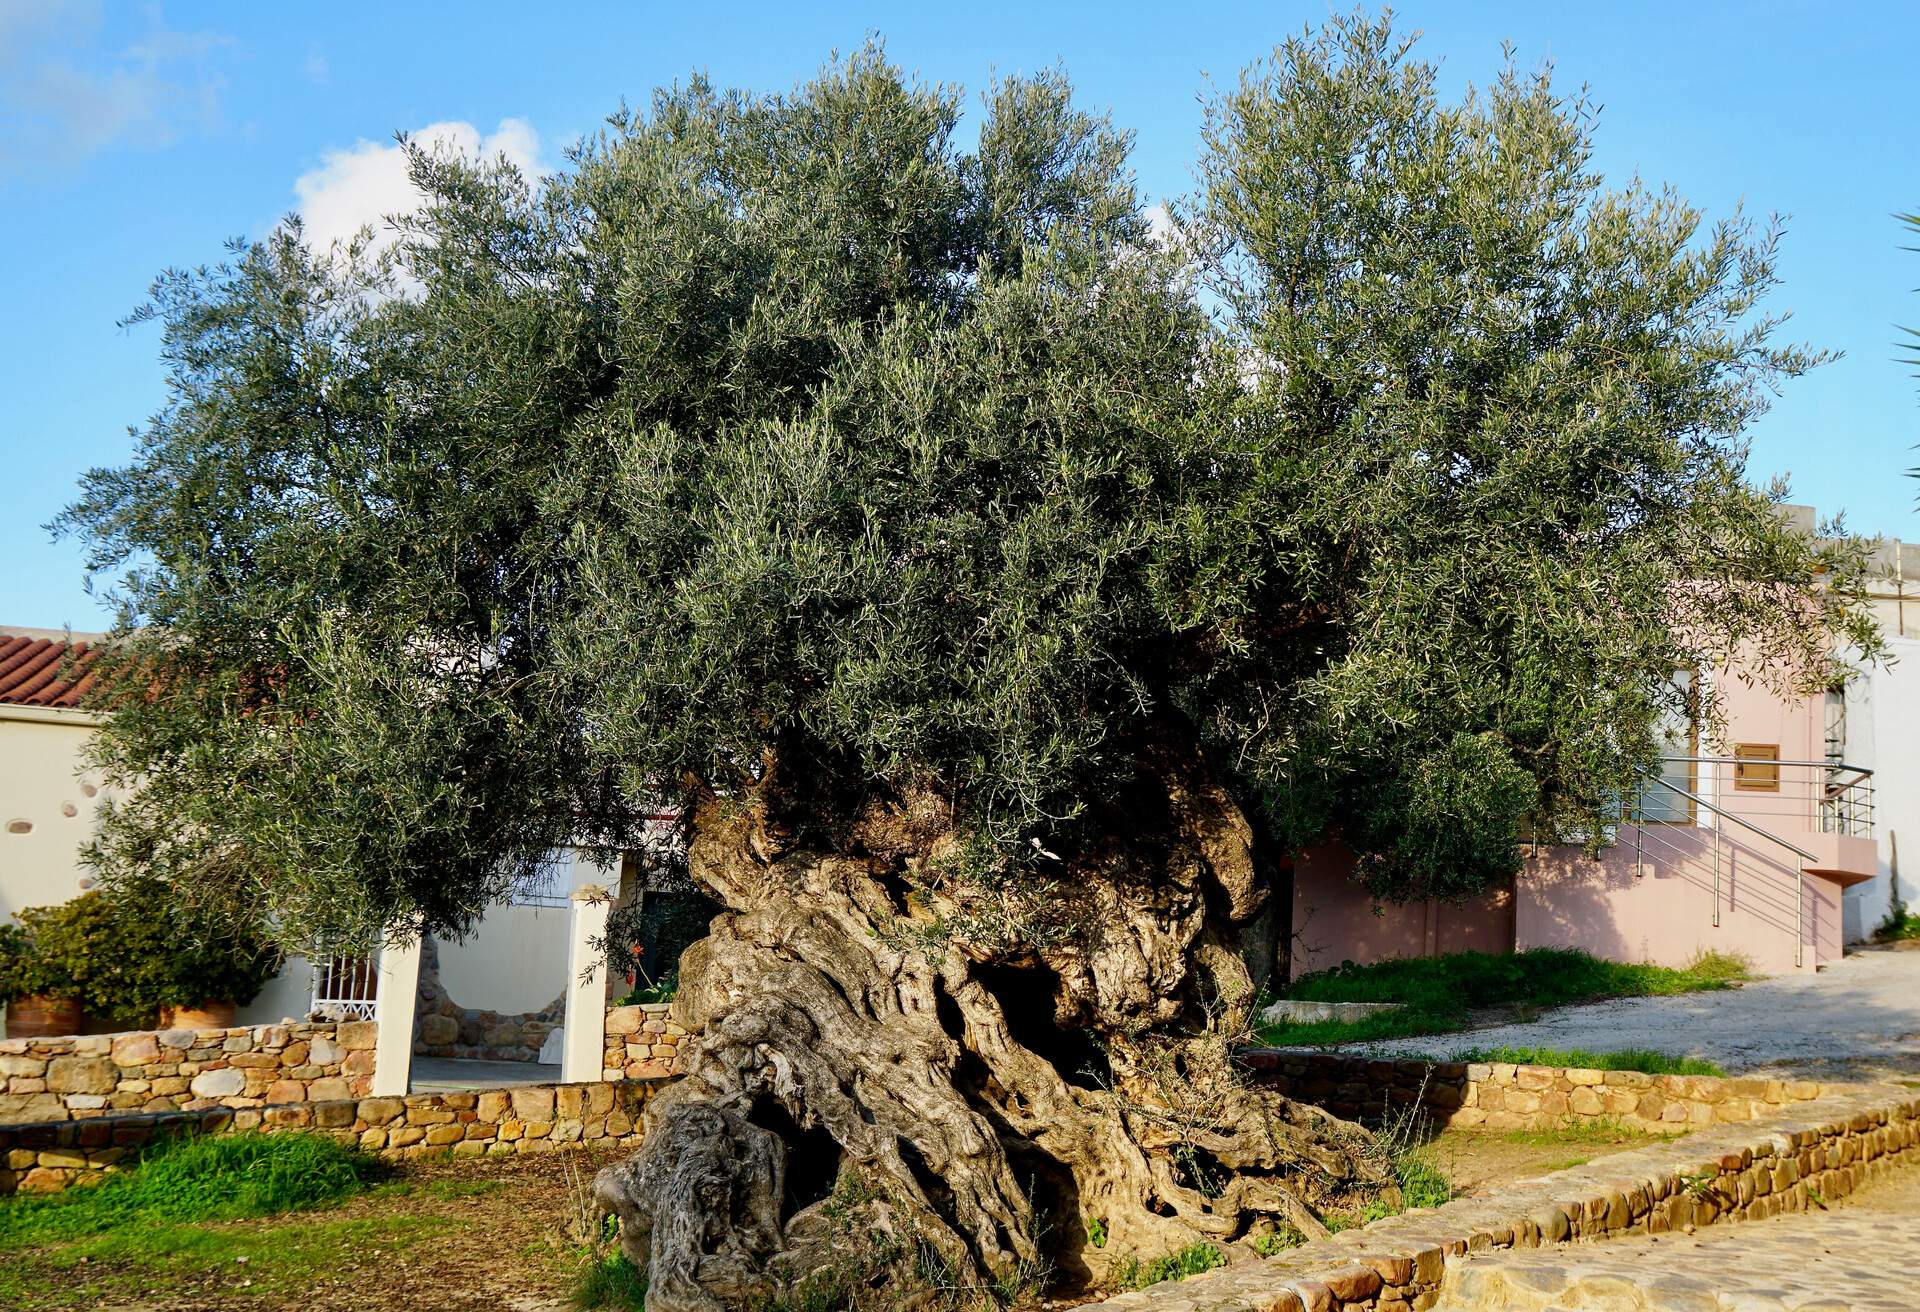 3000 year old olive tree in Ano Vouves close to Chania in Crete Wonderful ancient tree with big branches and gnarly wood with different faces of wood on the trunk; Shutterstock ID 1036403239; Brand (KAYAK, Momondo, Any): any